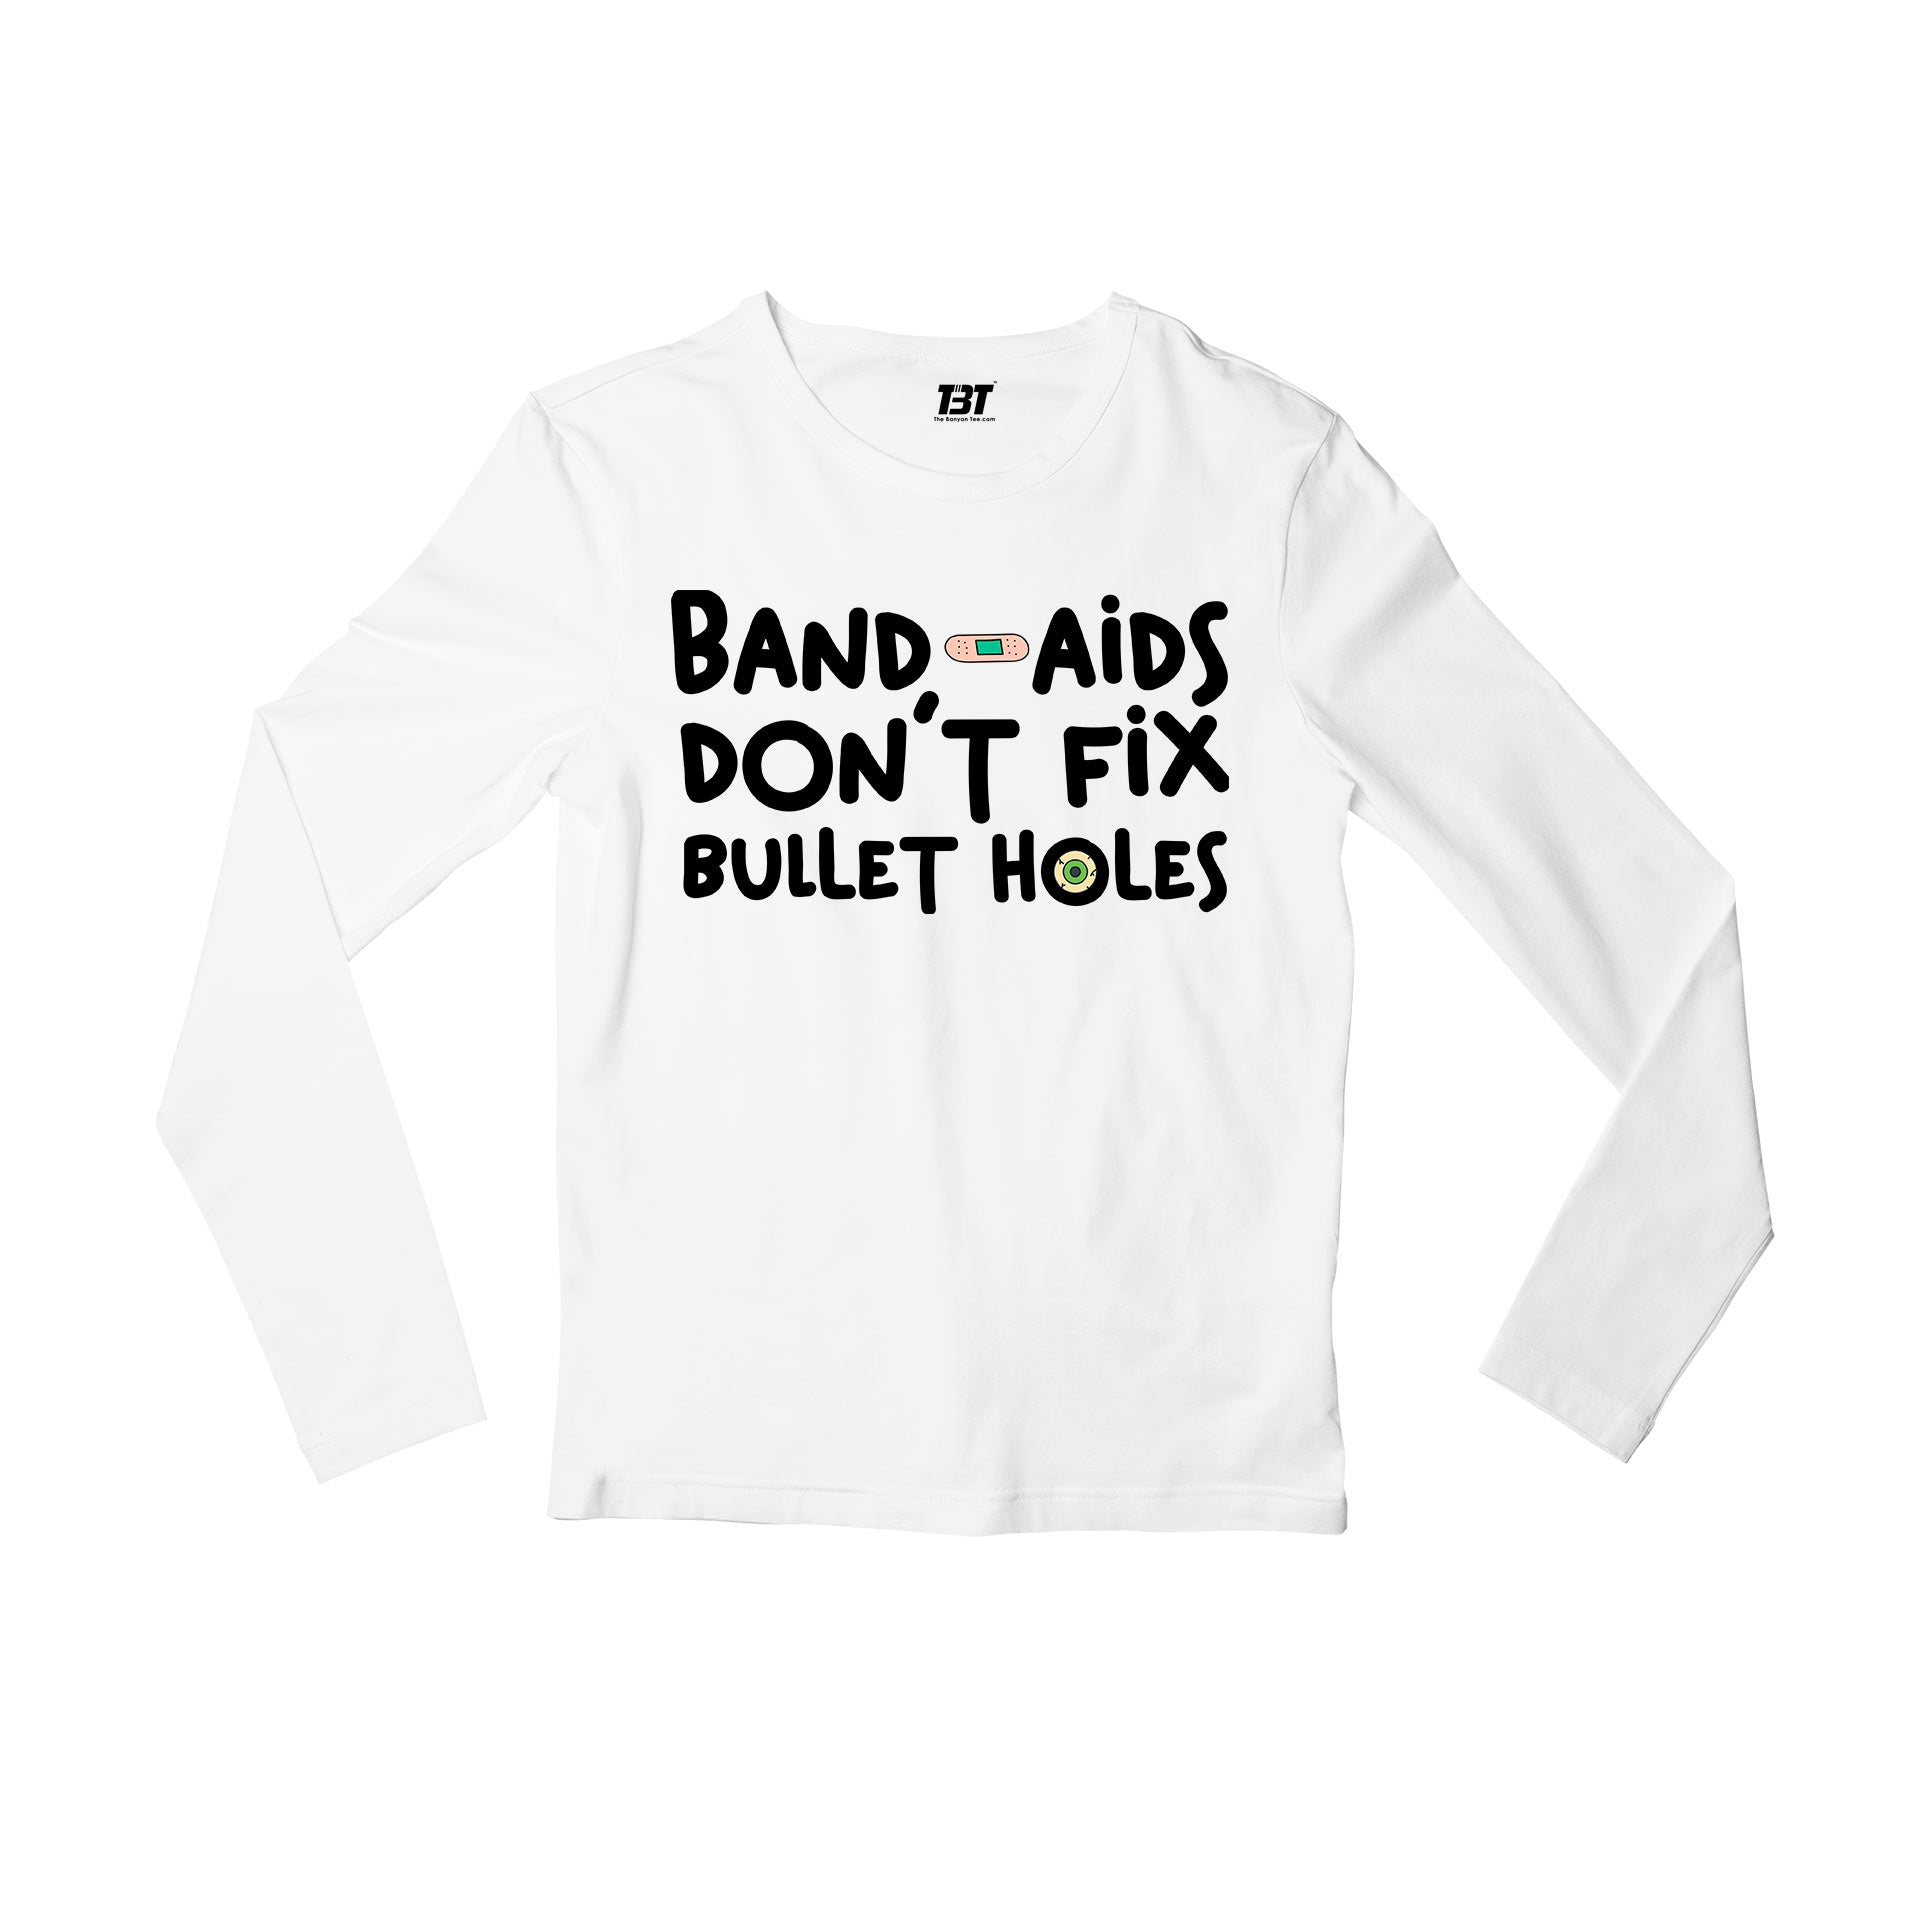 taylor swift bad blood full sleeves long sleeves music band buy online india the banyan tee tbt men women girls boys unisex gray band-aids don't fix bullet holes